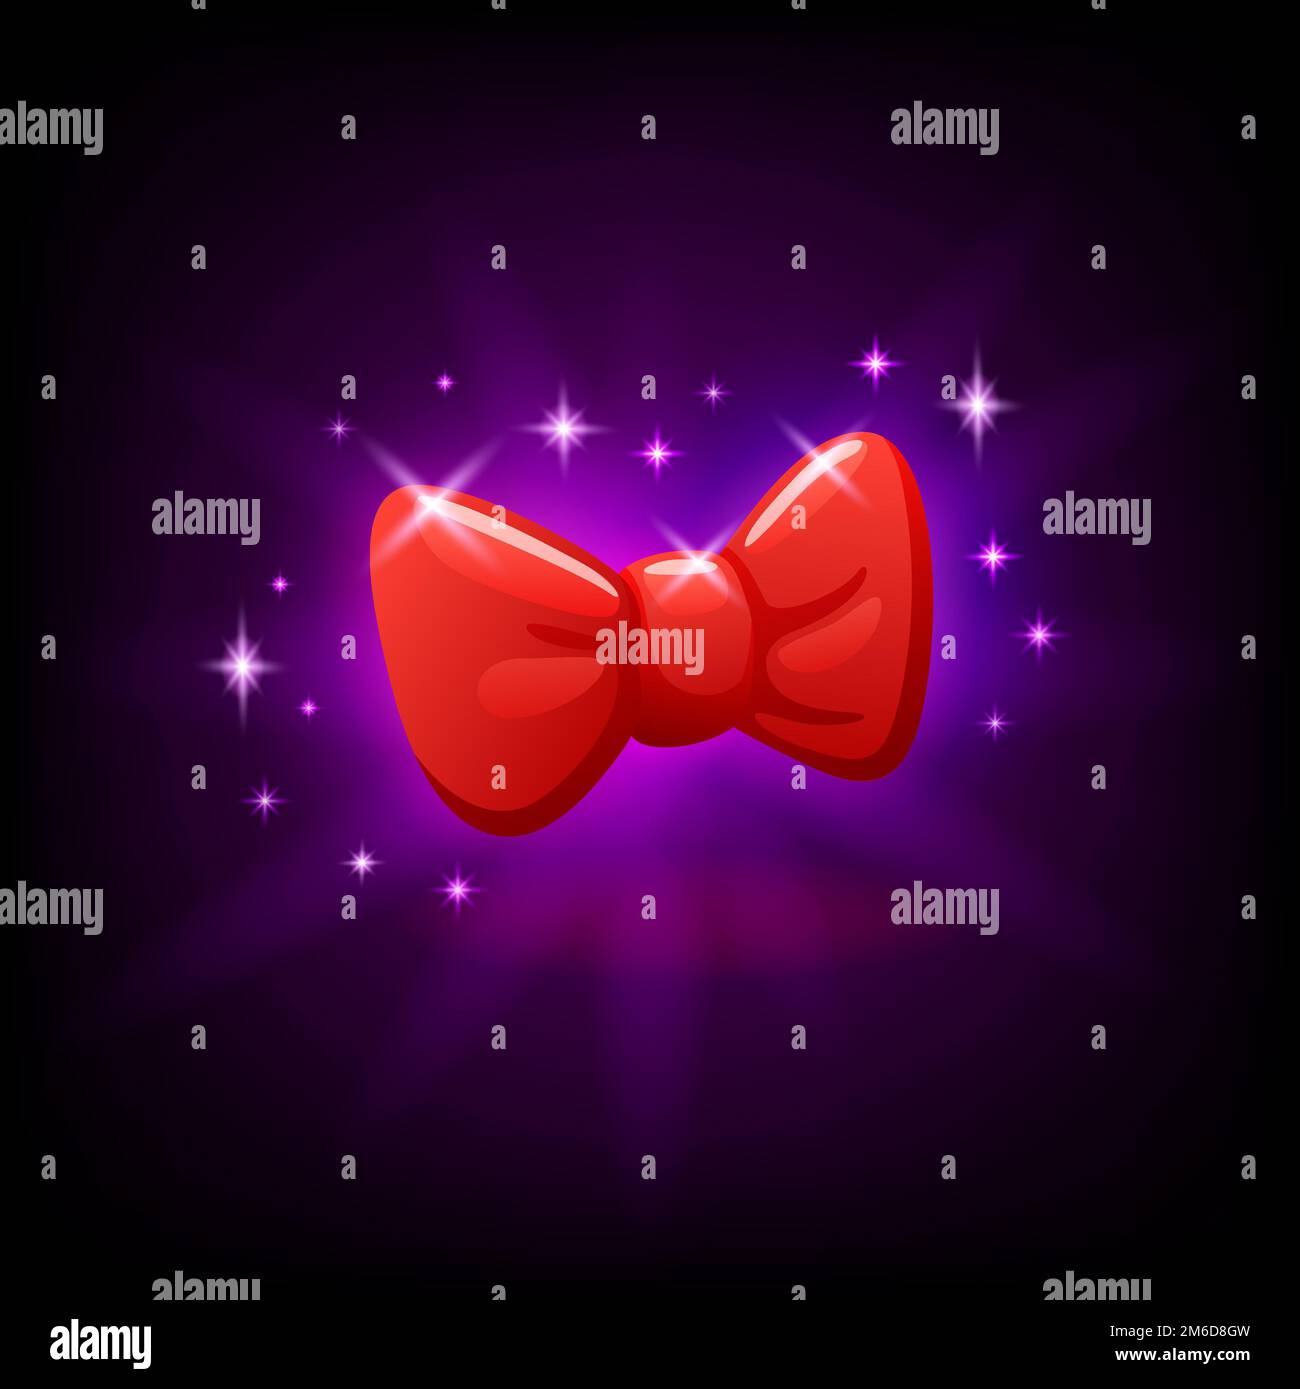 Red bow tie slot icon for online casino or mobile game, vector illustration with sparkles on dark purple background. Stock Photo